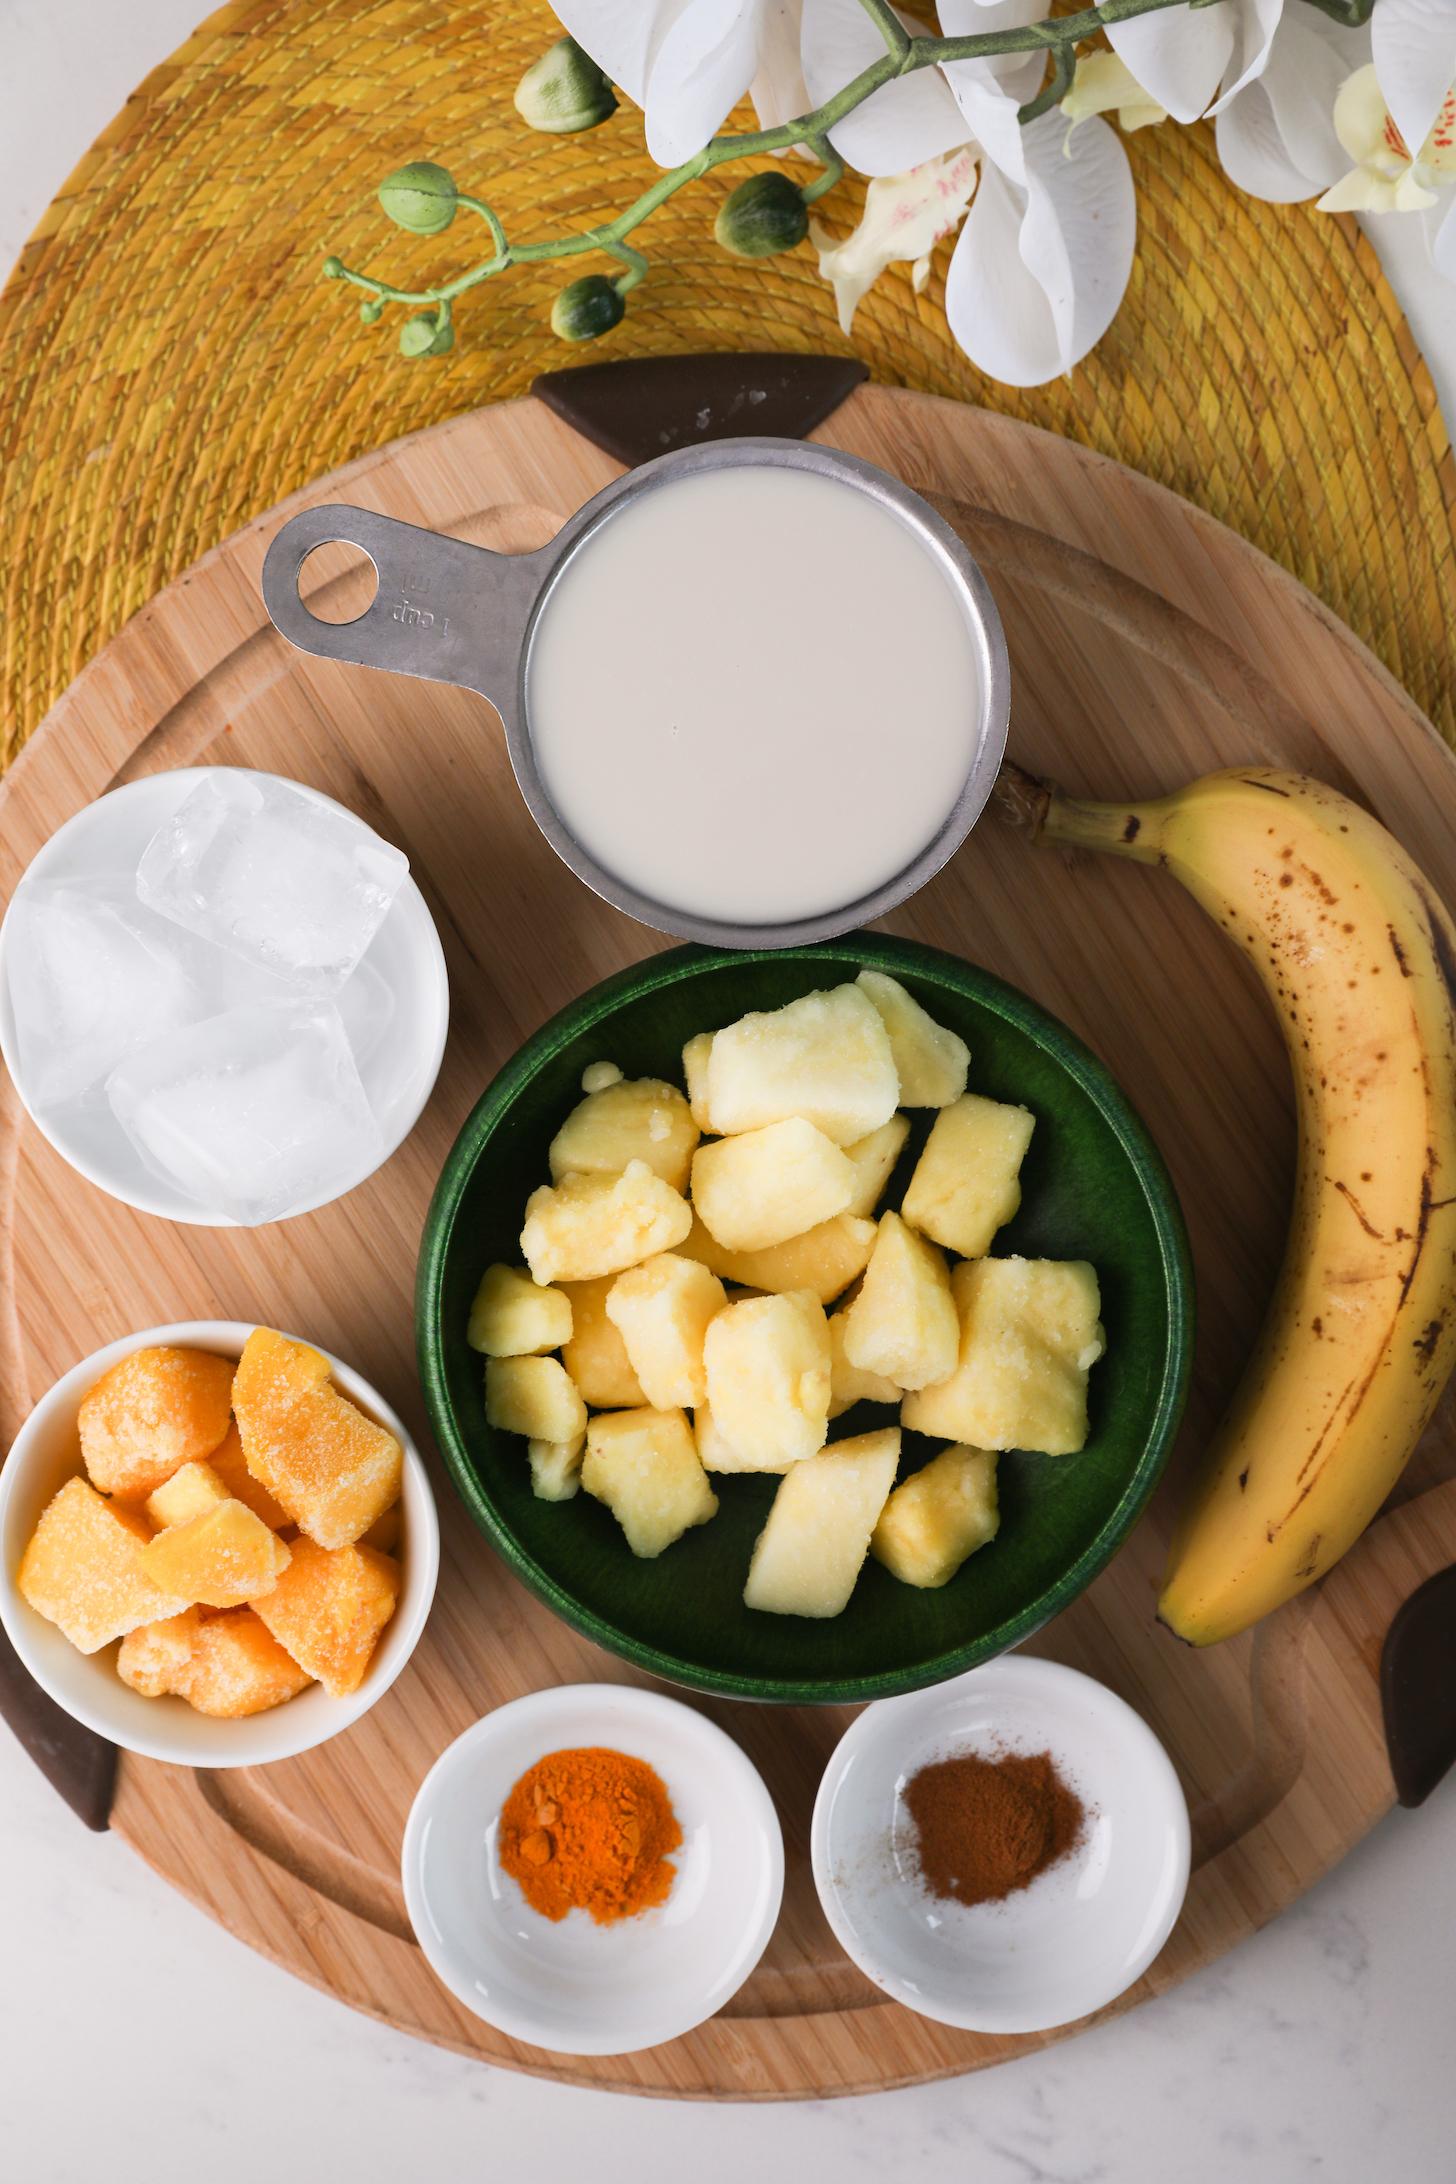 Food ingredients like pineapple and mango chunks, banana and milk arranged on a wooden board.